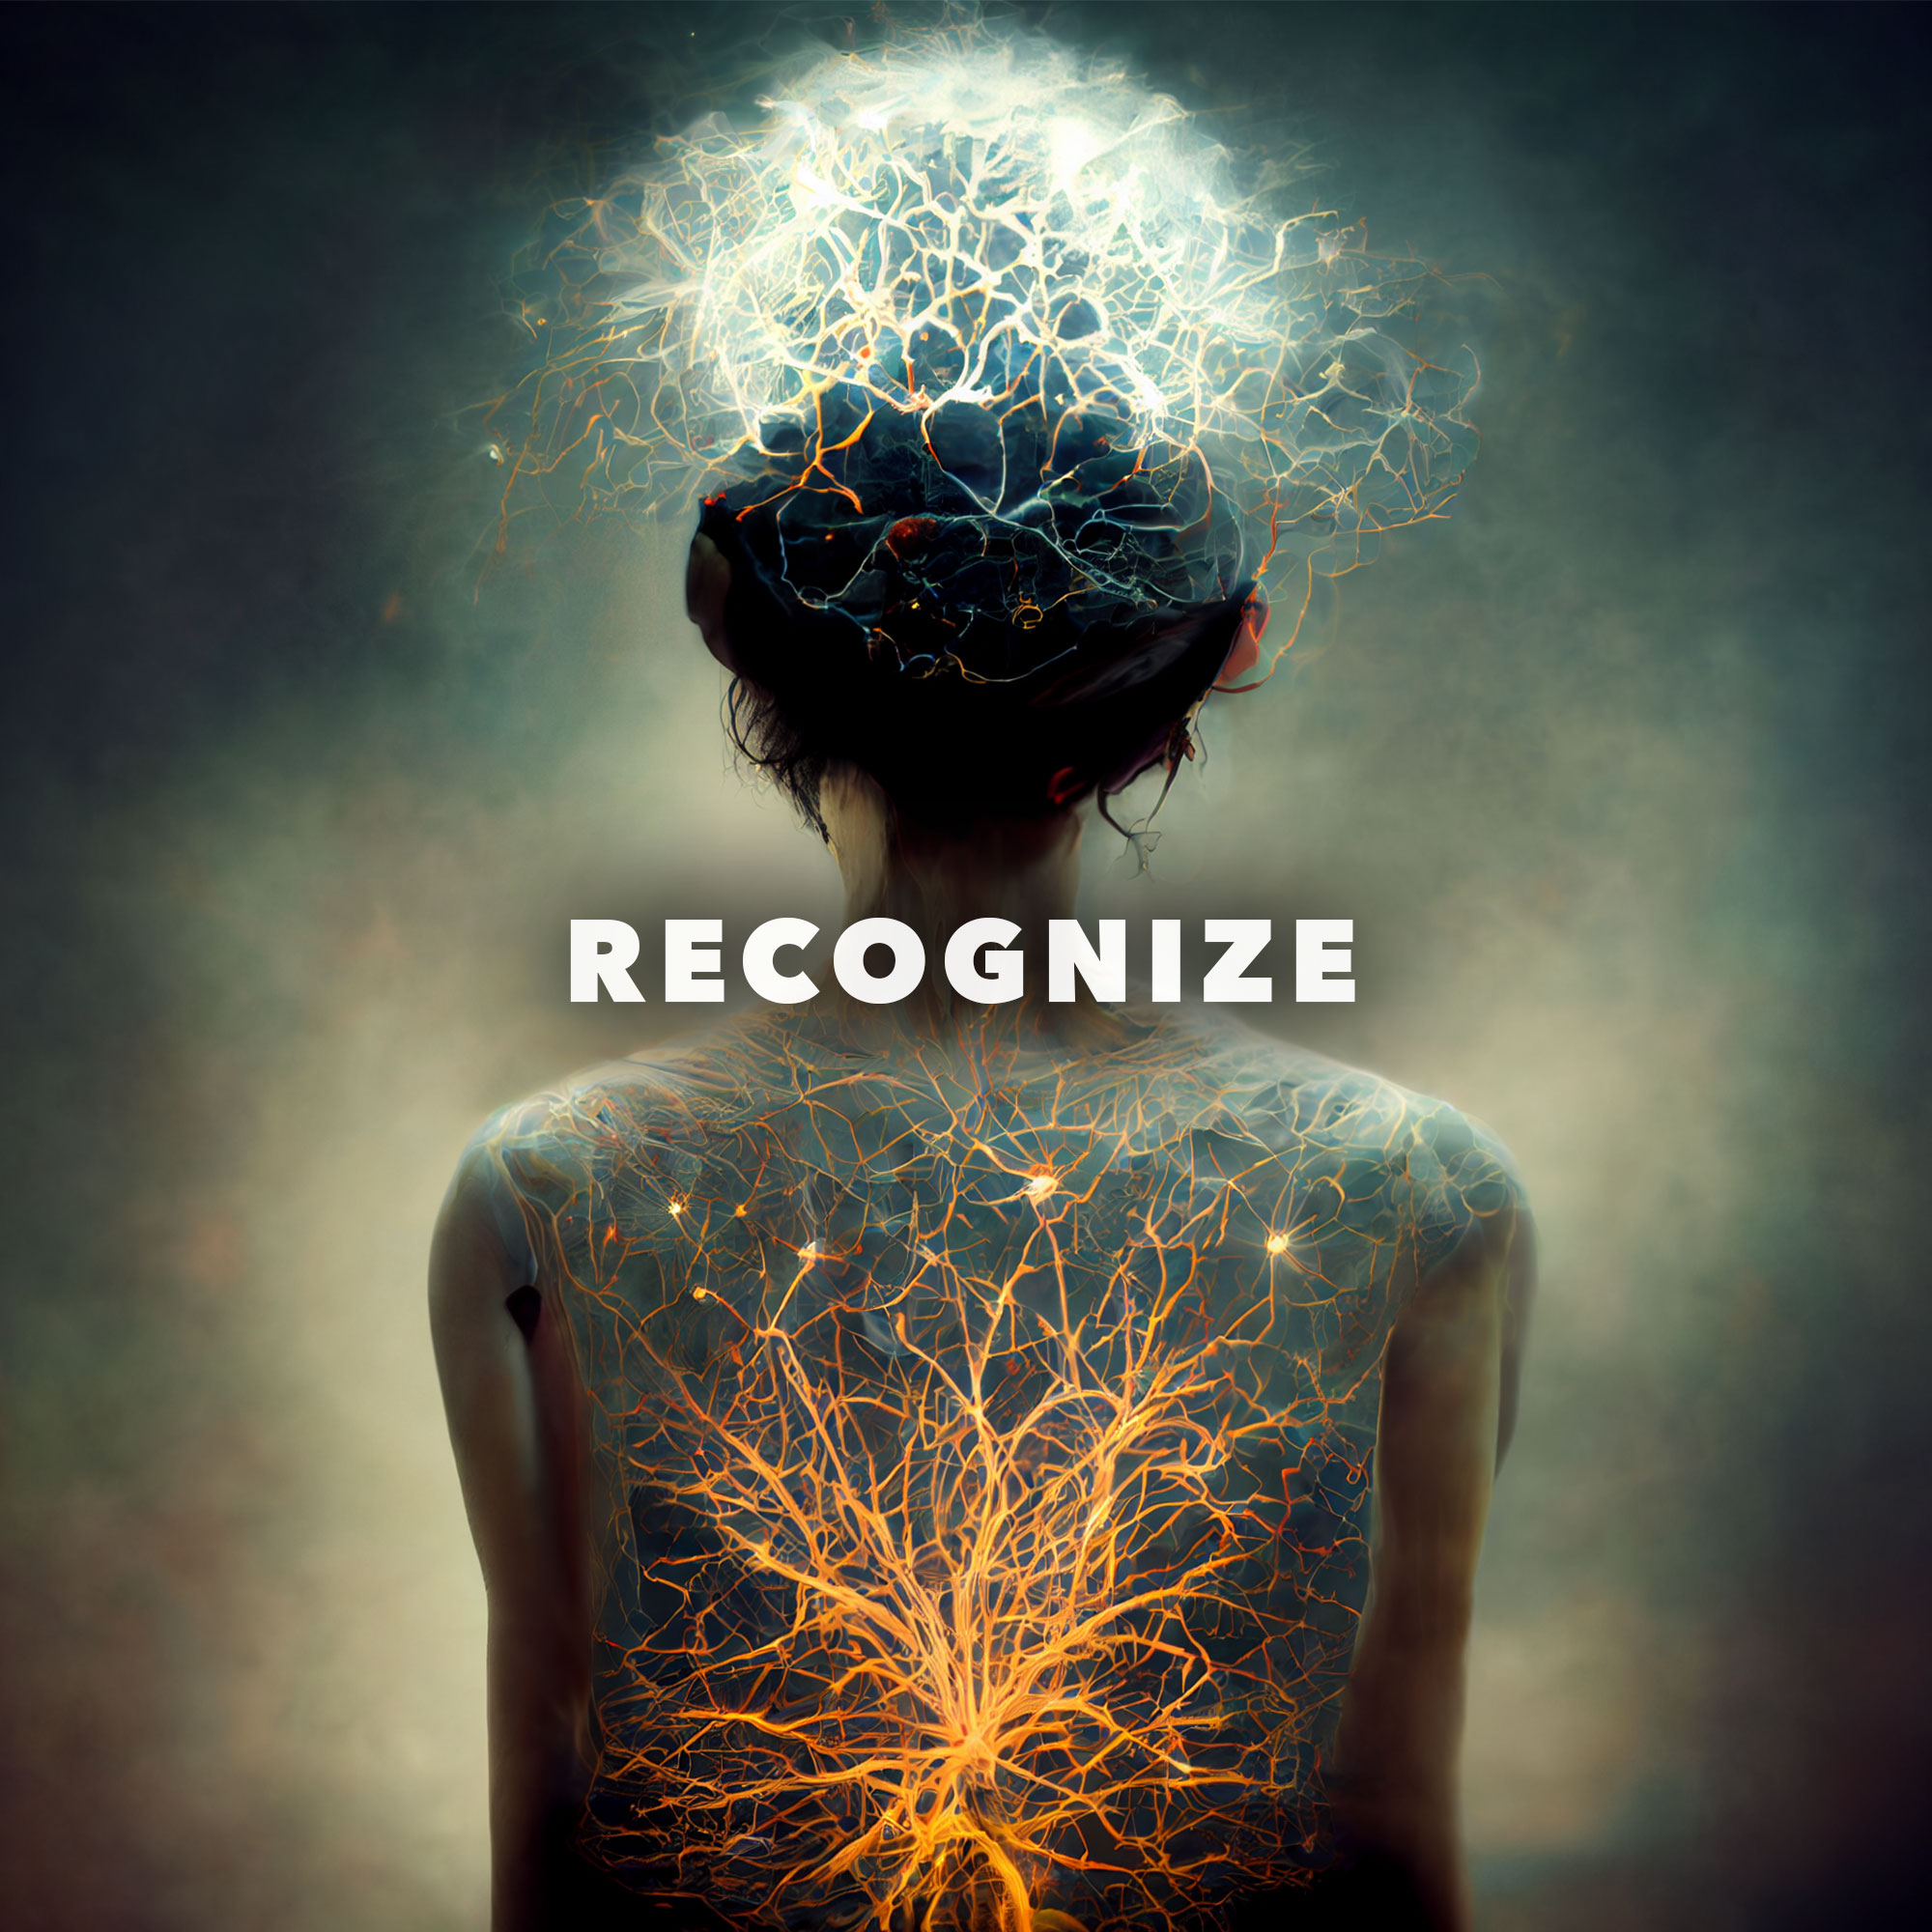 RECOGNIZE ~ clearly seeing patterned behavior